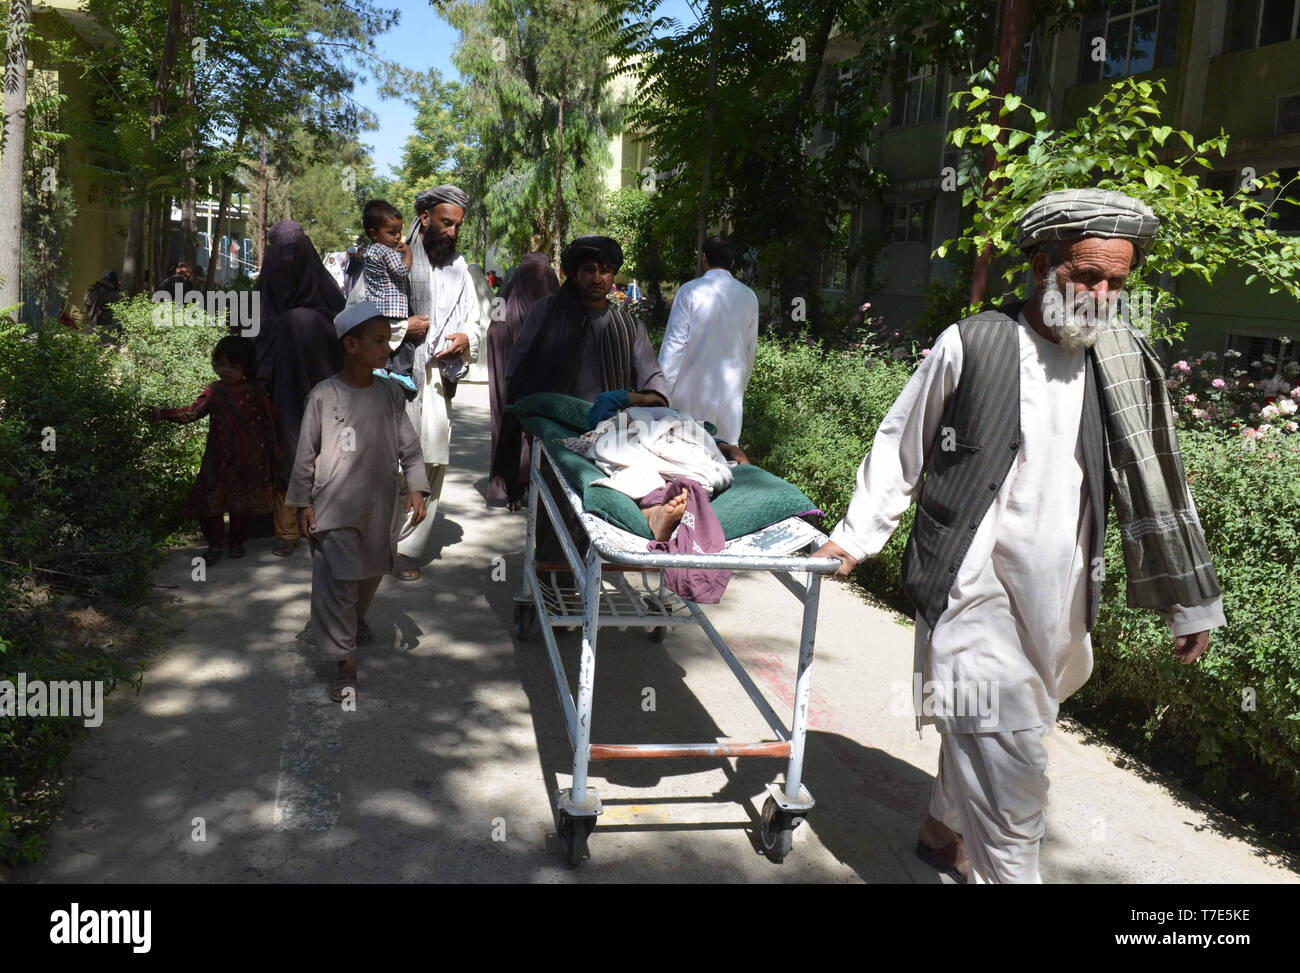 (190507) -- KANDAHAR, May 7, 2019 (Xinhua) -- People carry a man for medical treatment at the Mirwais Regional Hospital in Kandahar, Afghanistan, May 4, 2019. The Mirwais Regional Hospital, locally known as the 'Chinese Hospital', was built by China in 1974 and put into operation in 1979 on 44 acres of land in Kandahar, the largest city in the southern region as a gift to the Afghan people. The hospital is the largest health center in Afghanistan's southern region and provides almost all kinds of services to patients ranging from diagnosis of diseases to surgery of war victims, childcare and m Stock Photo